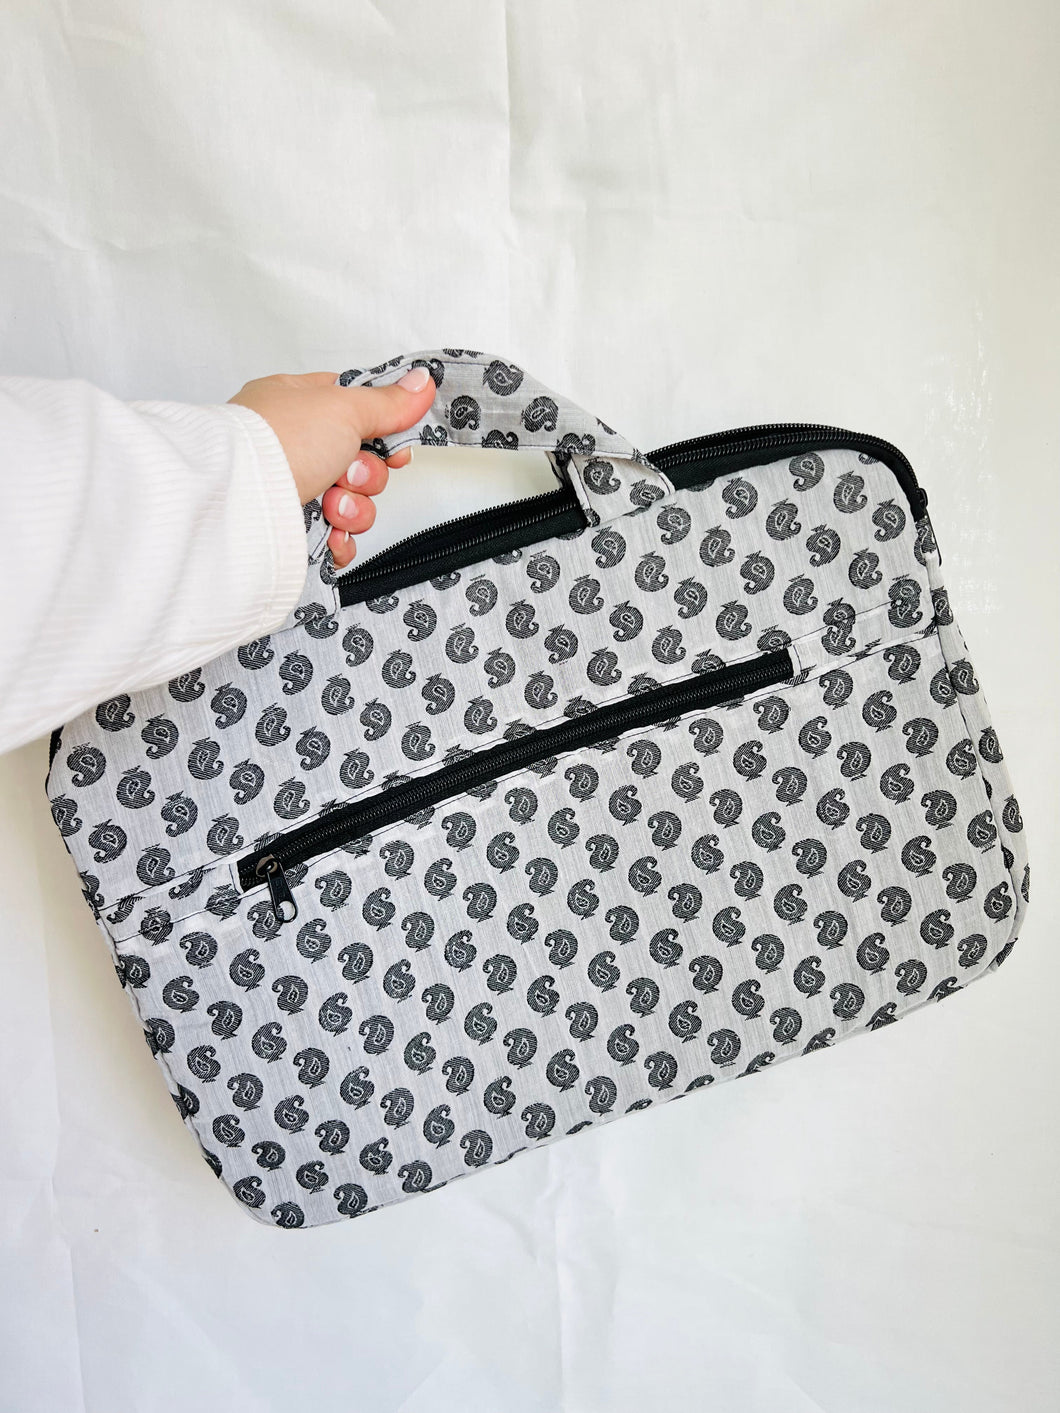 Laptop Bags - Upcycled Laptop Bag